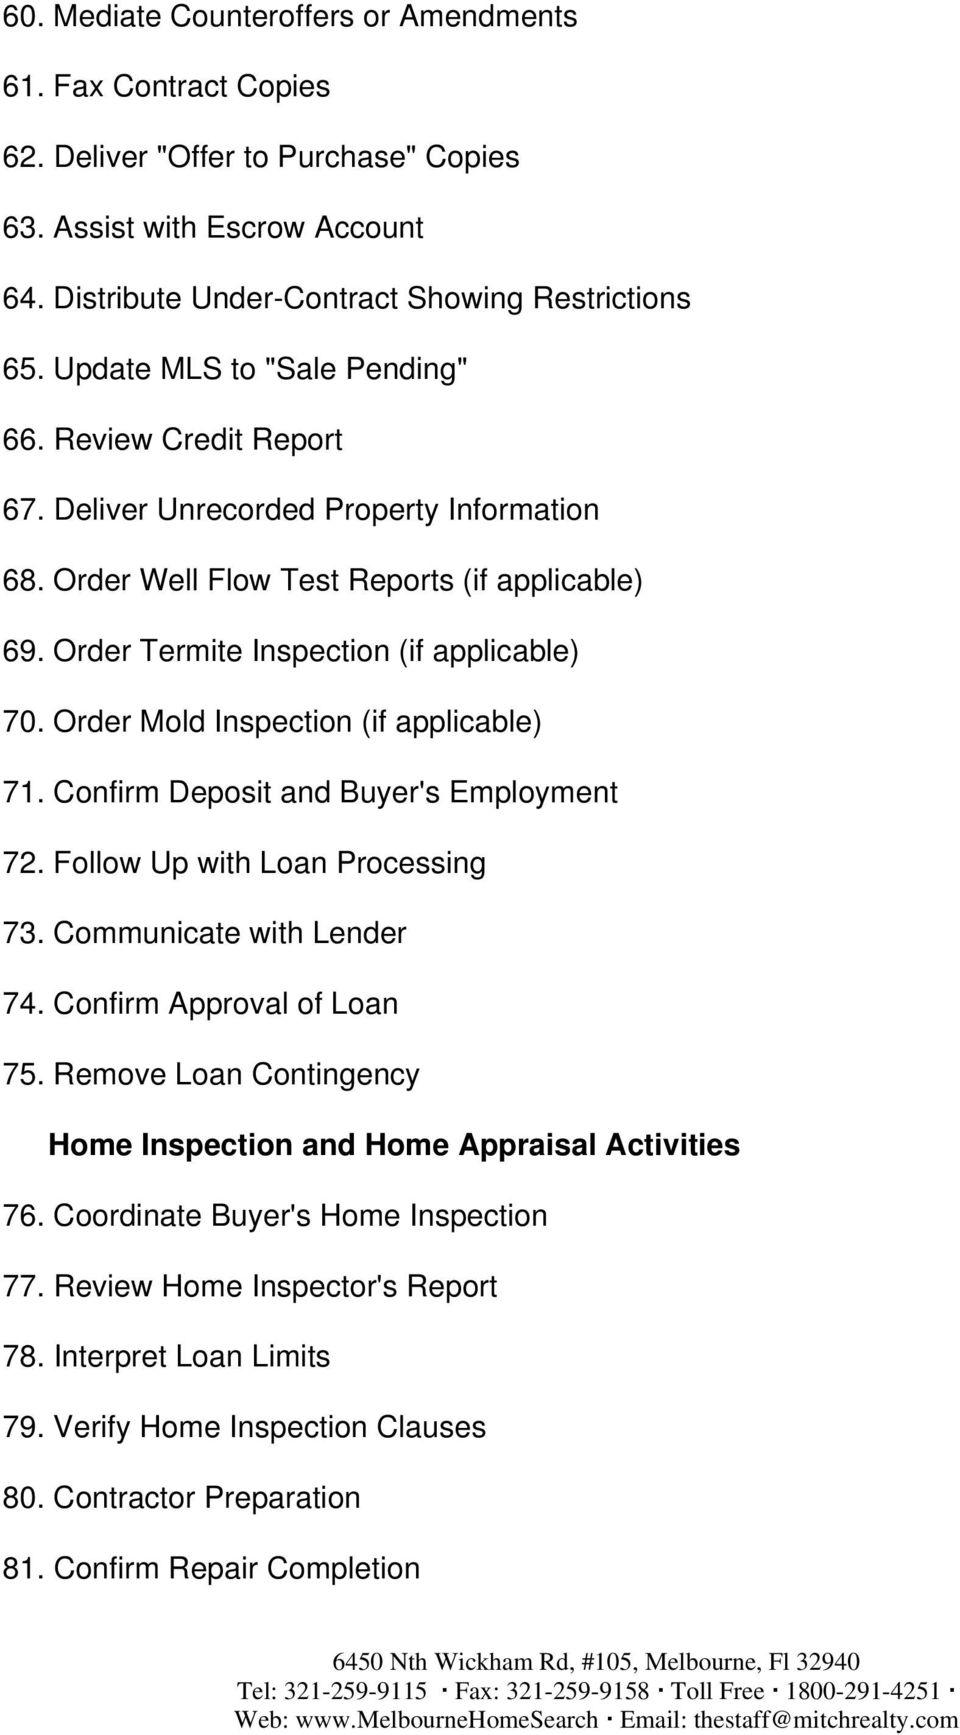 Order Mold Inspection (if applicable) 71. Confirm Deposit and Buyer's Employment 72. Follow Up with Loan Processing 73. Communicate with Lender 74. Confirm Approval of Loan 75.